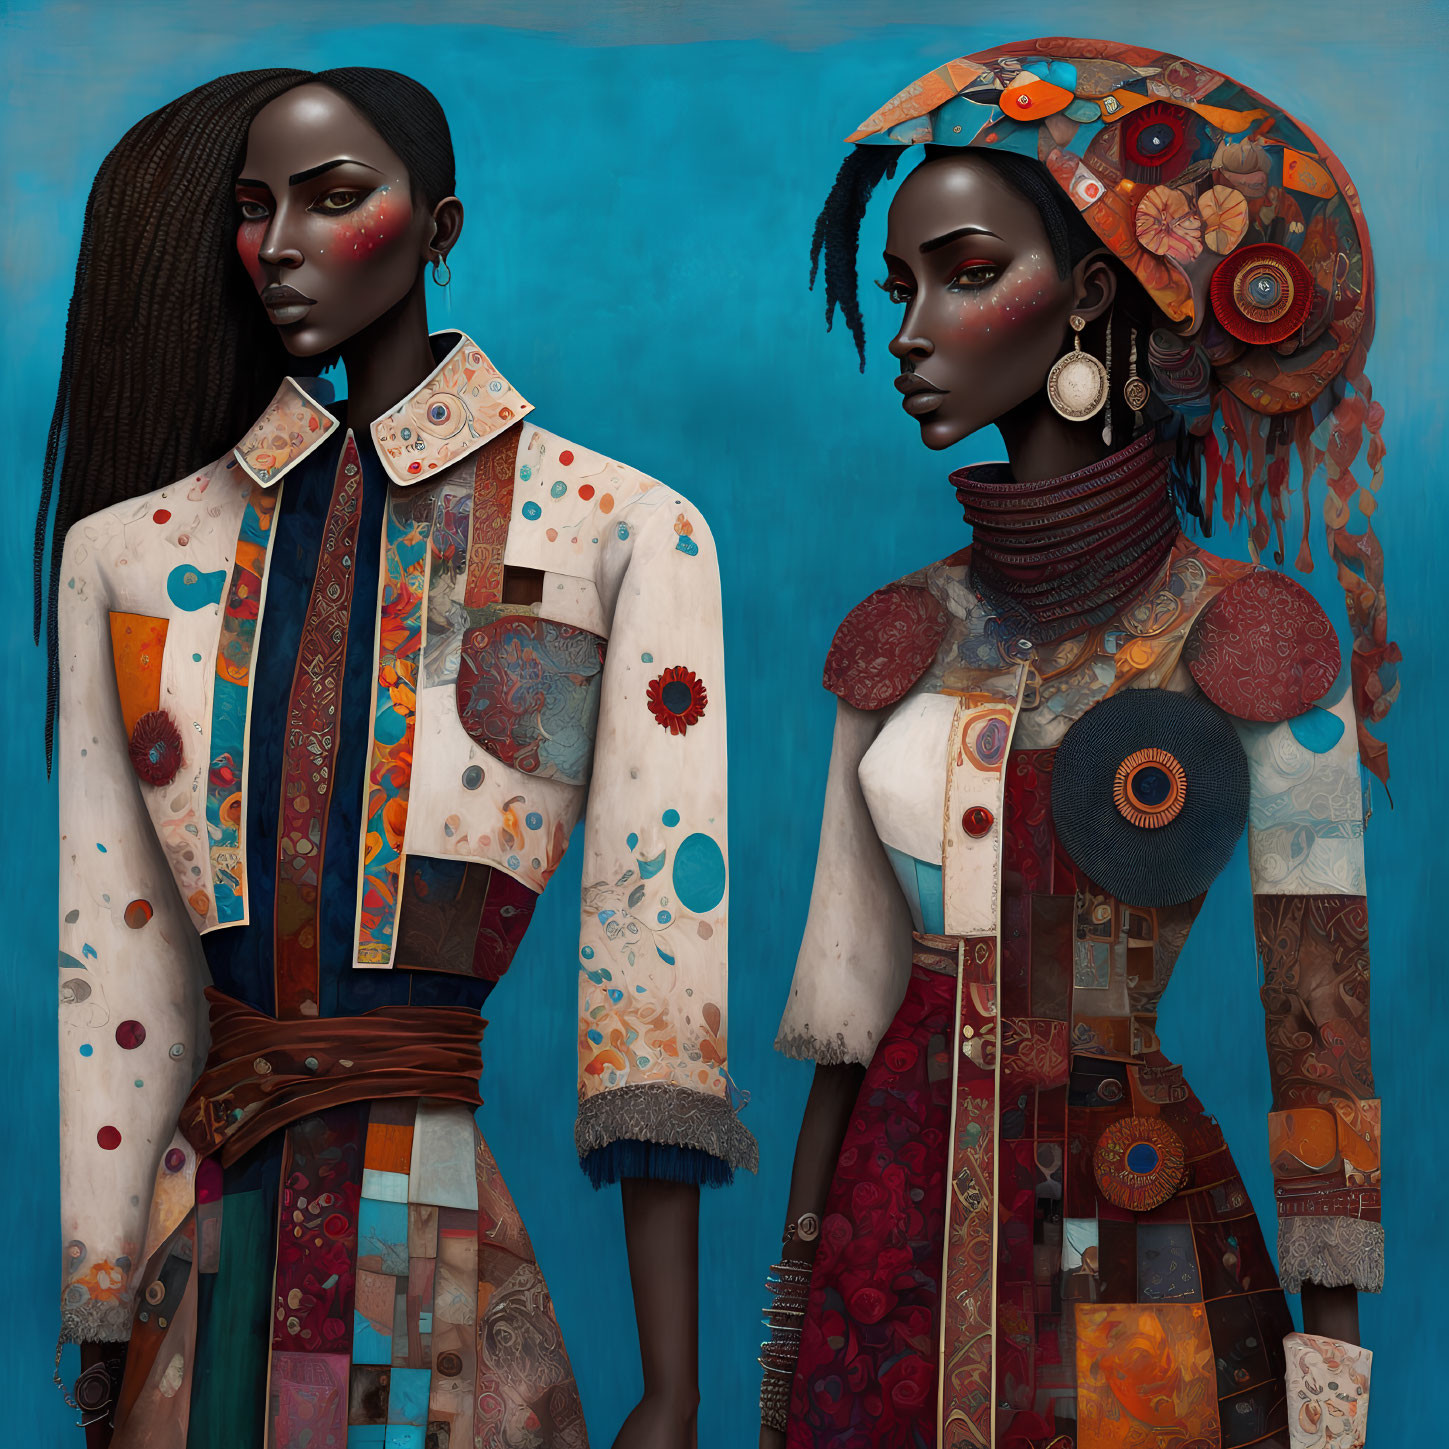 African-inspired female figures in elaborate attire and headpieces on blue background